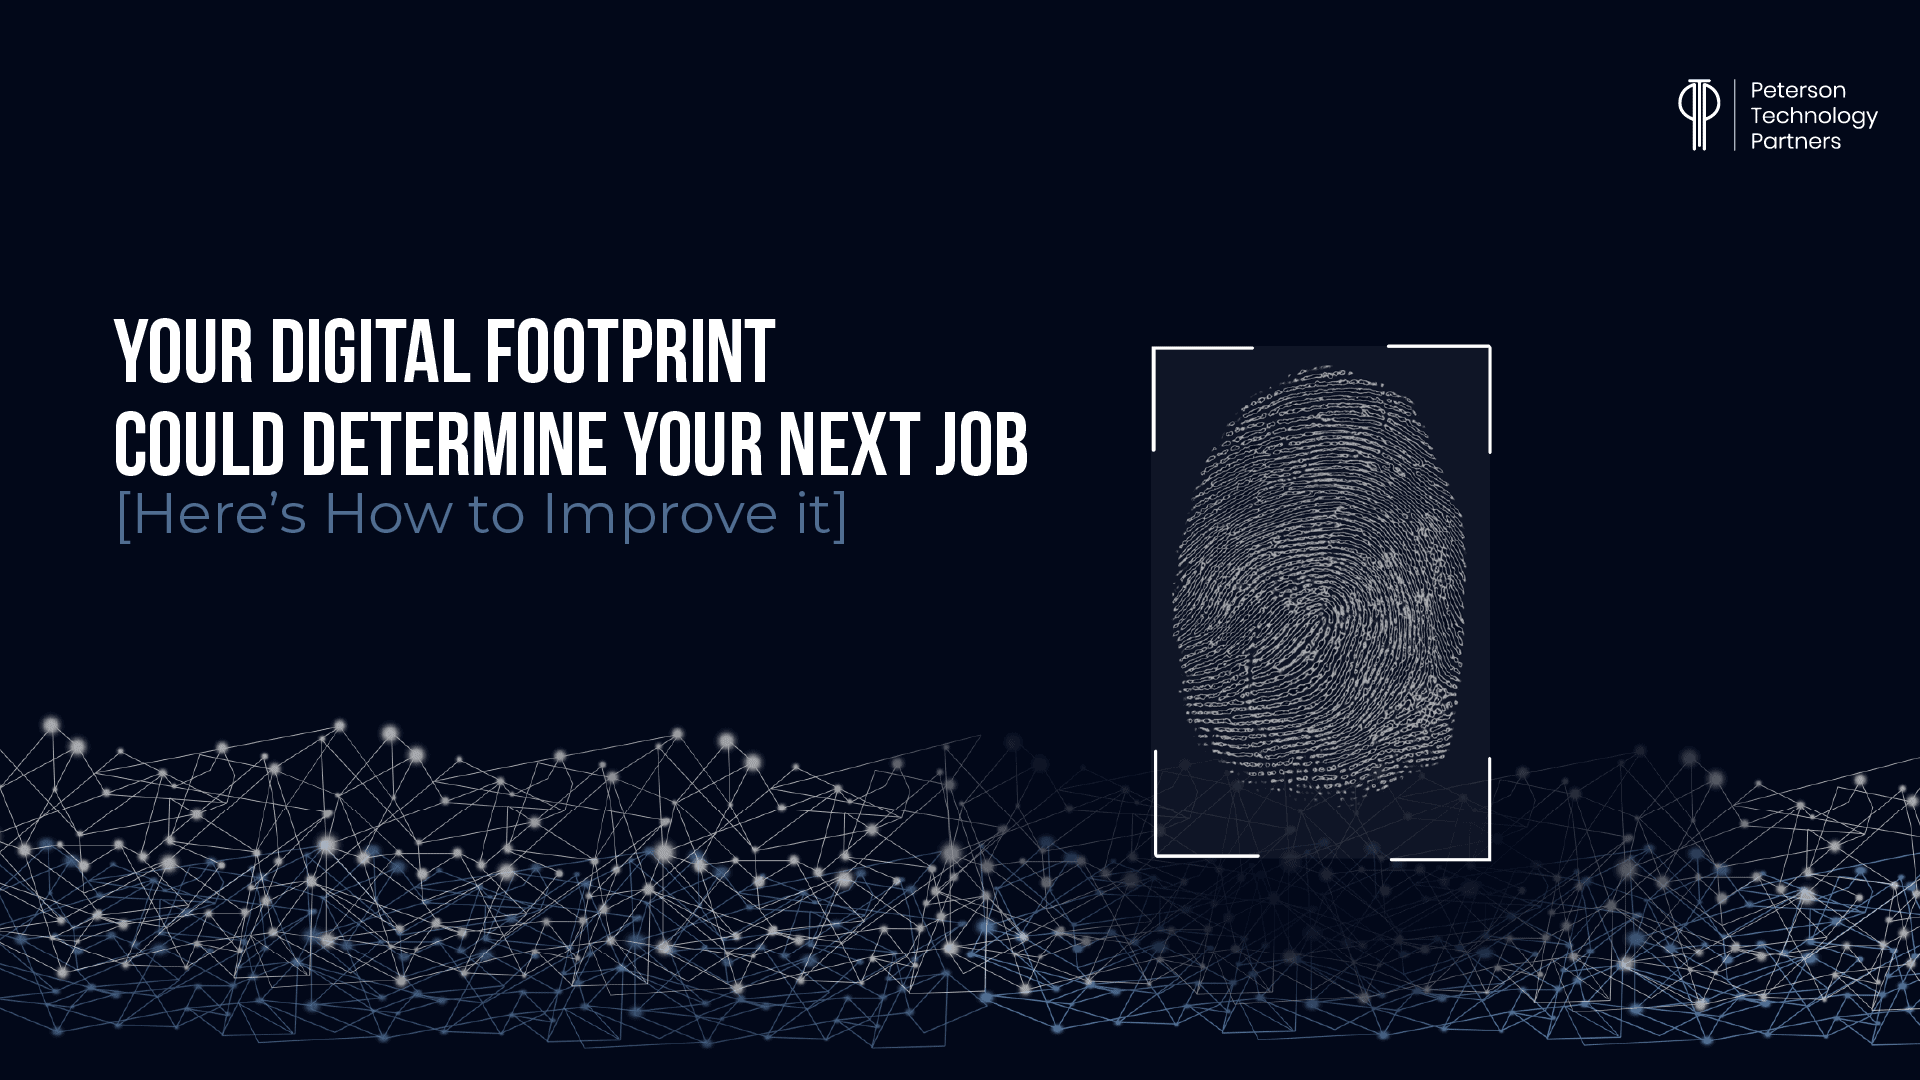 Your Digital Footprint Could Determine Your Next Job [Here’s How to Improve it]